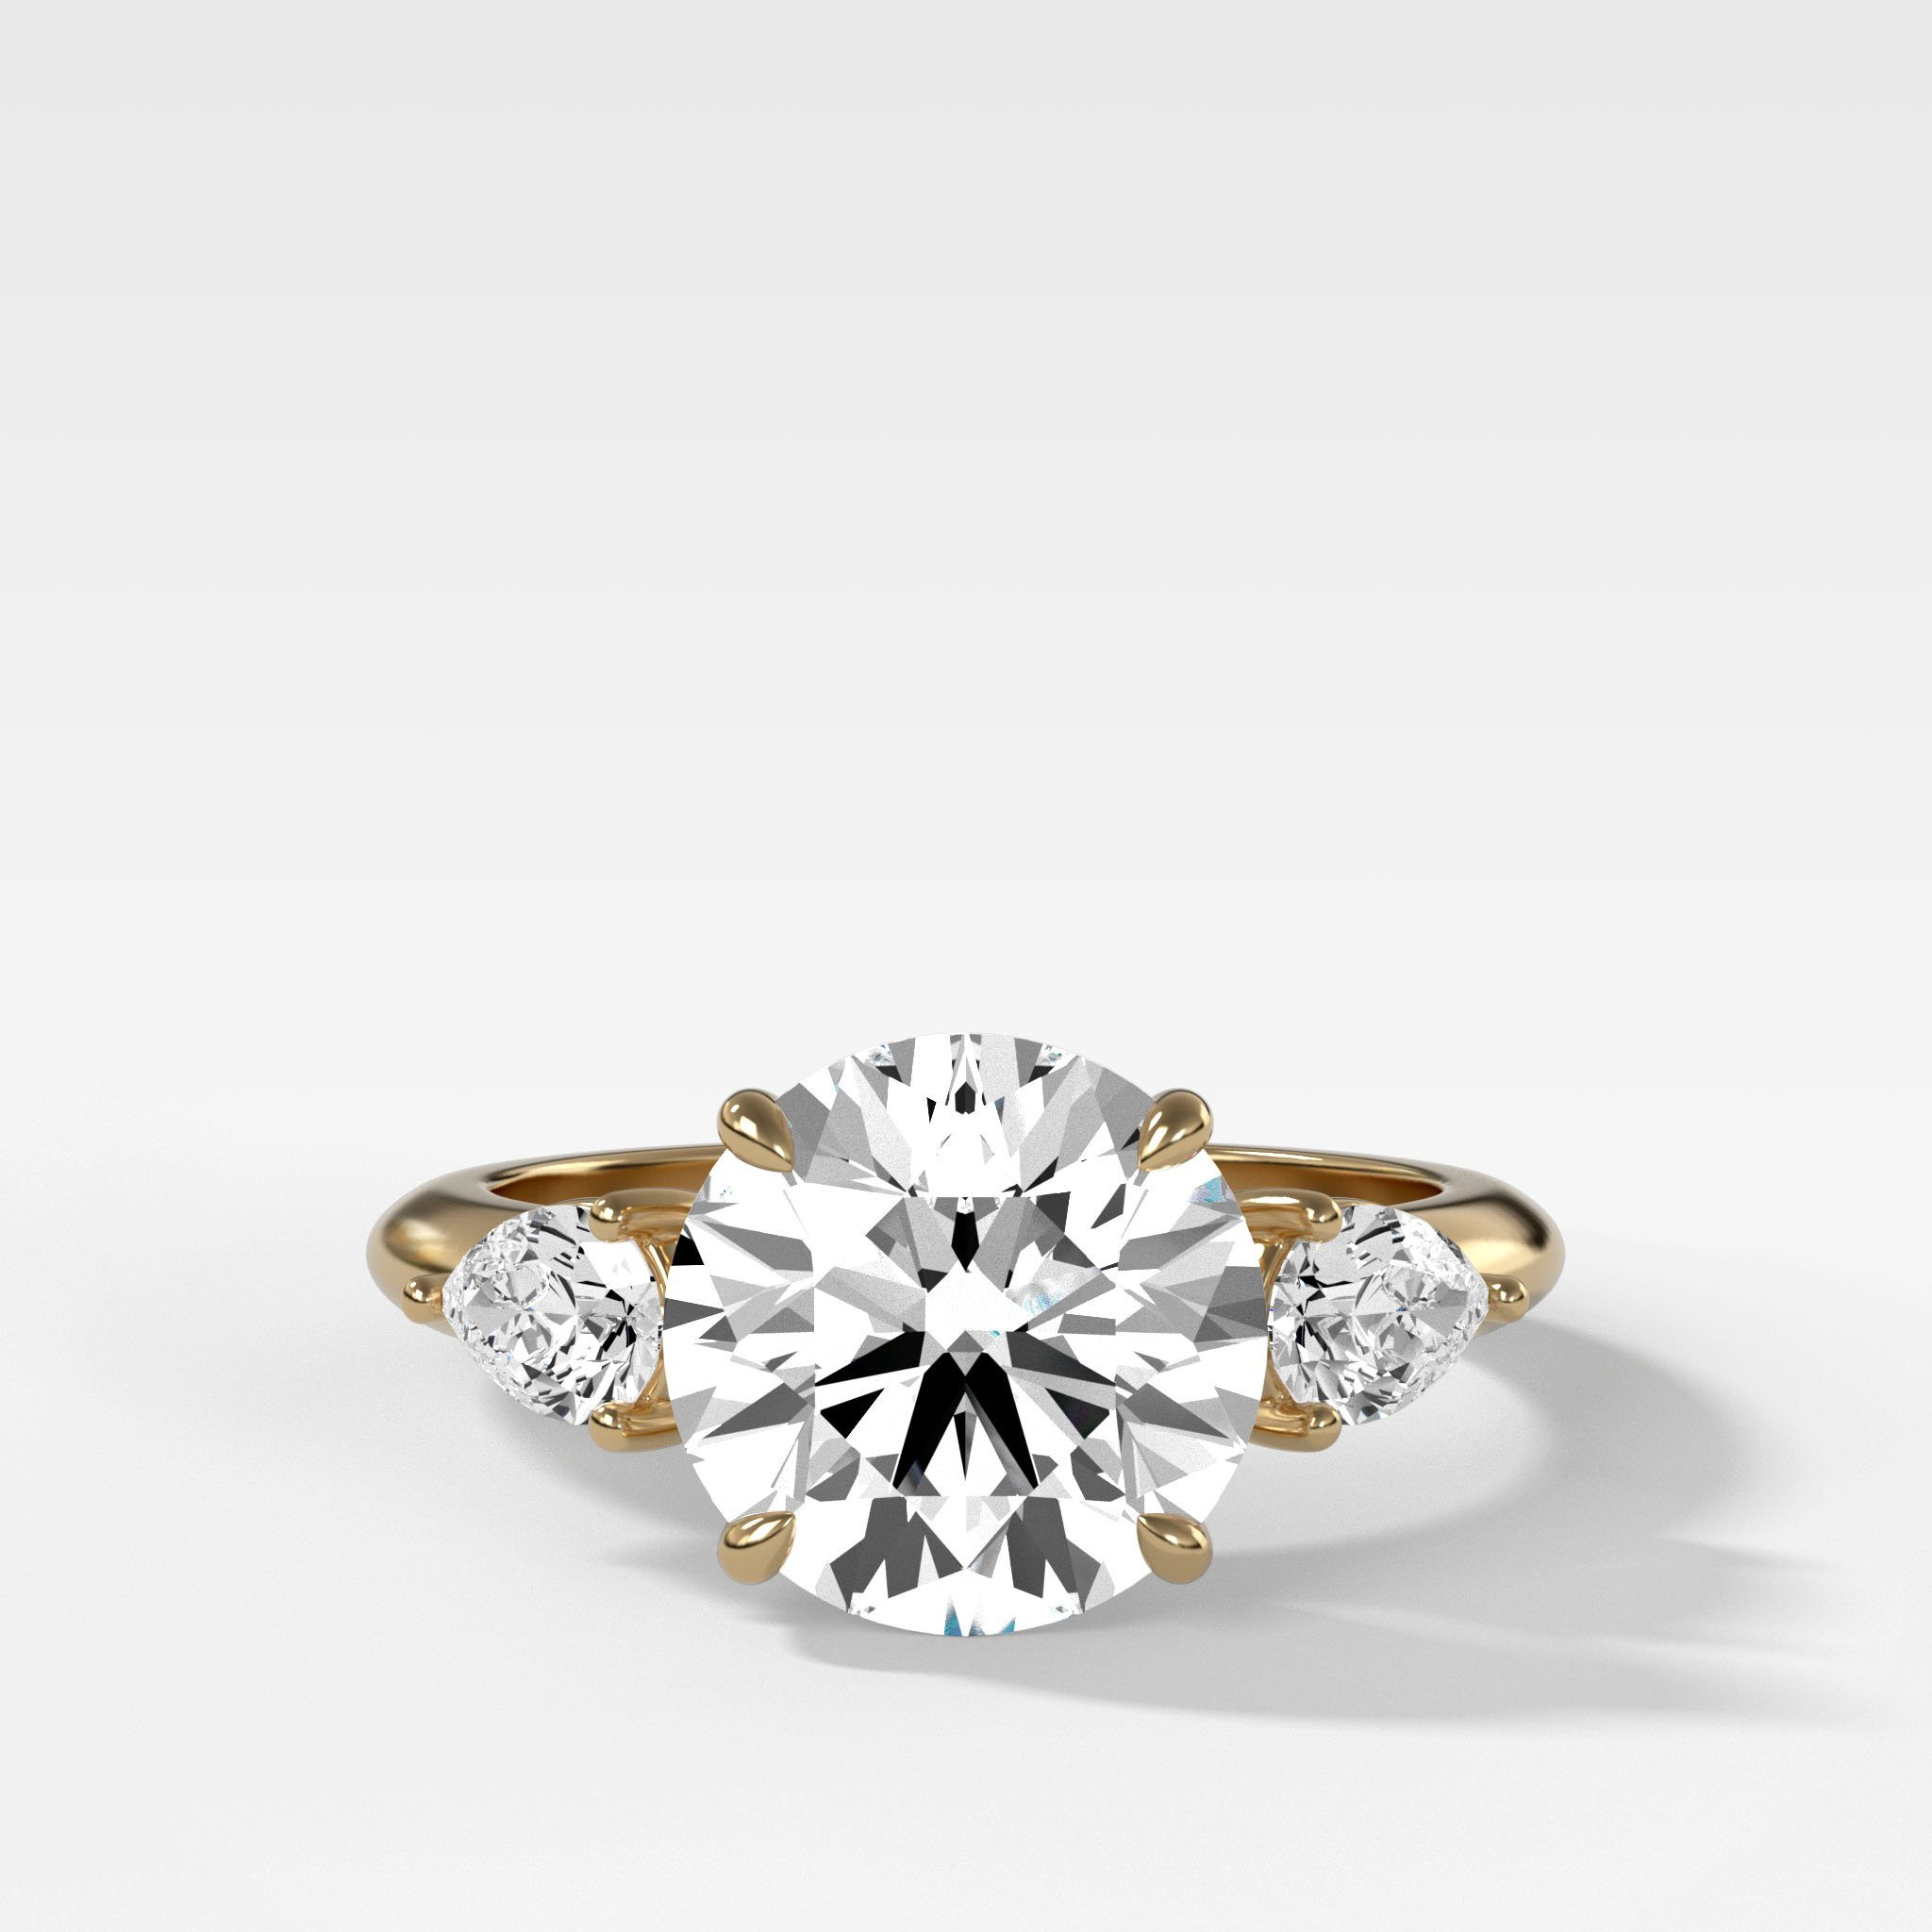 GOODSTONE Three Stone Engagement Ring With Pear Side Stones With Round Cut Diamond